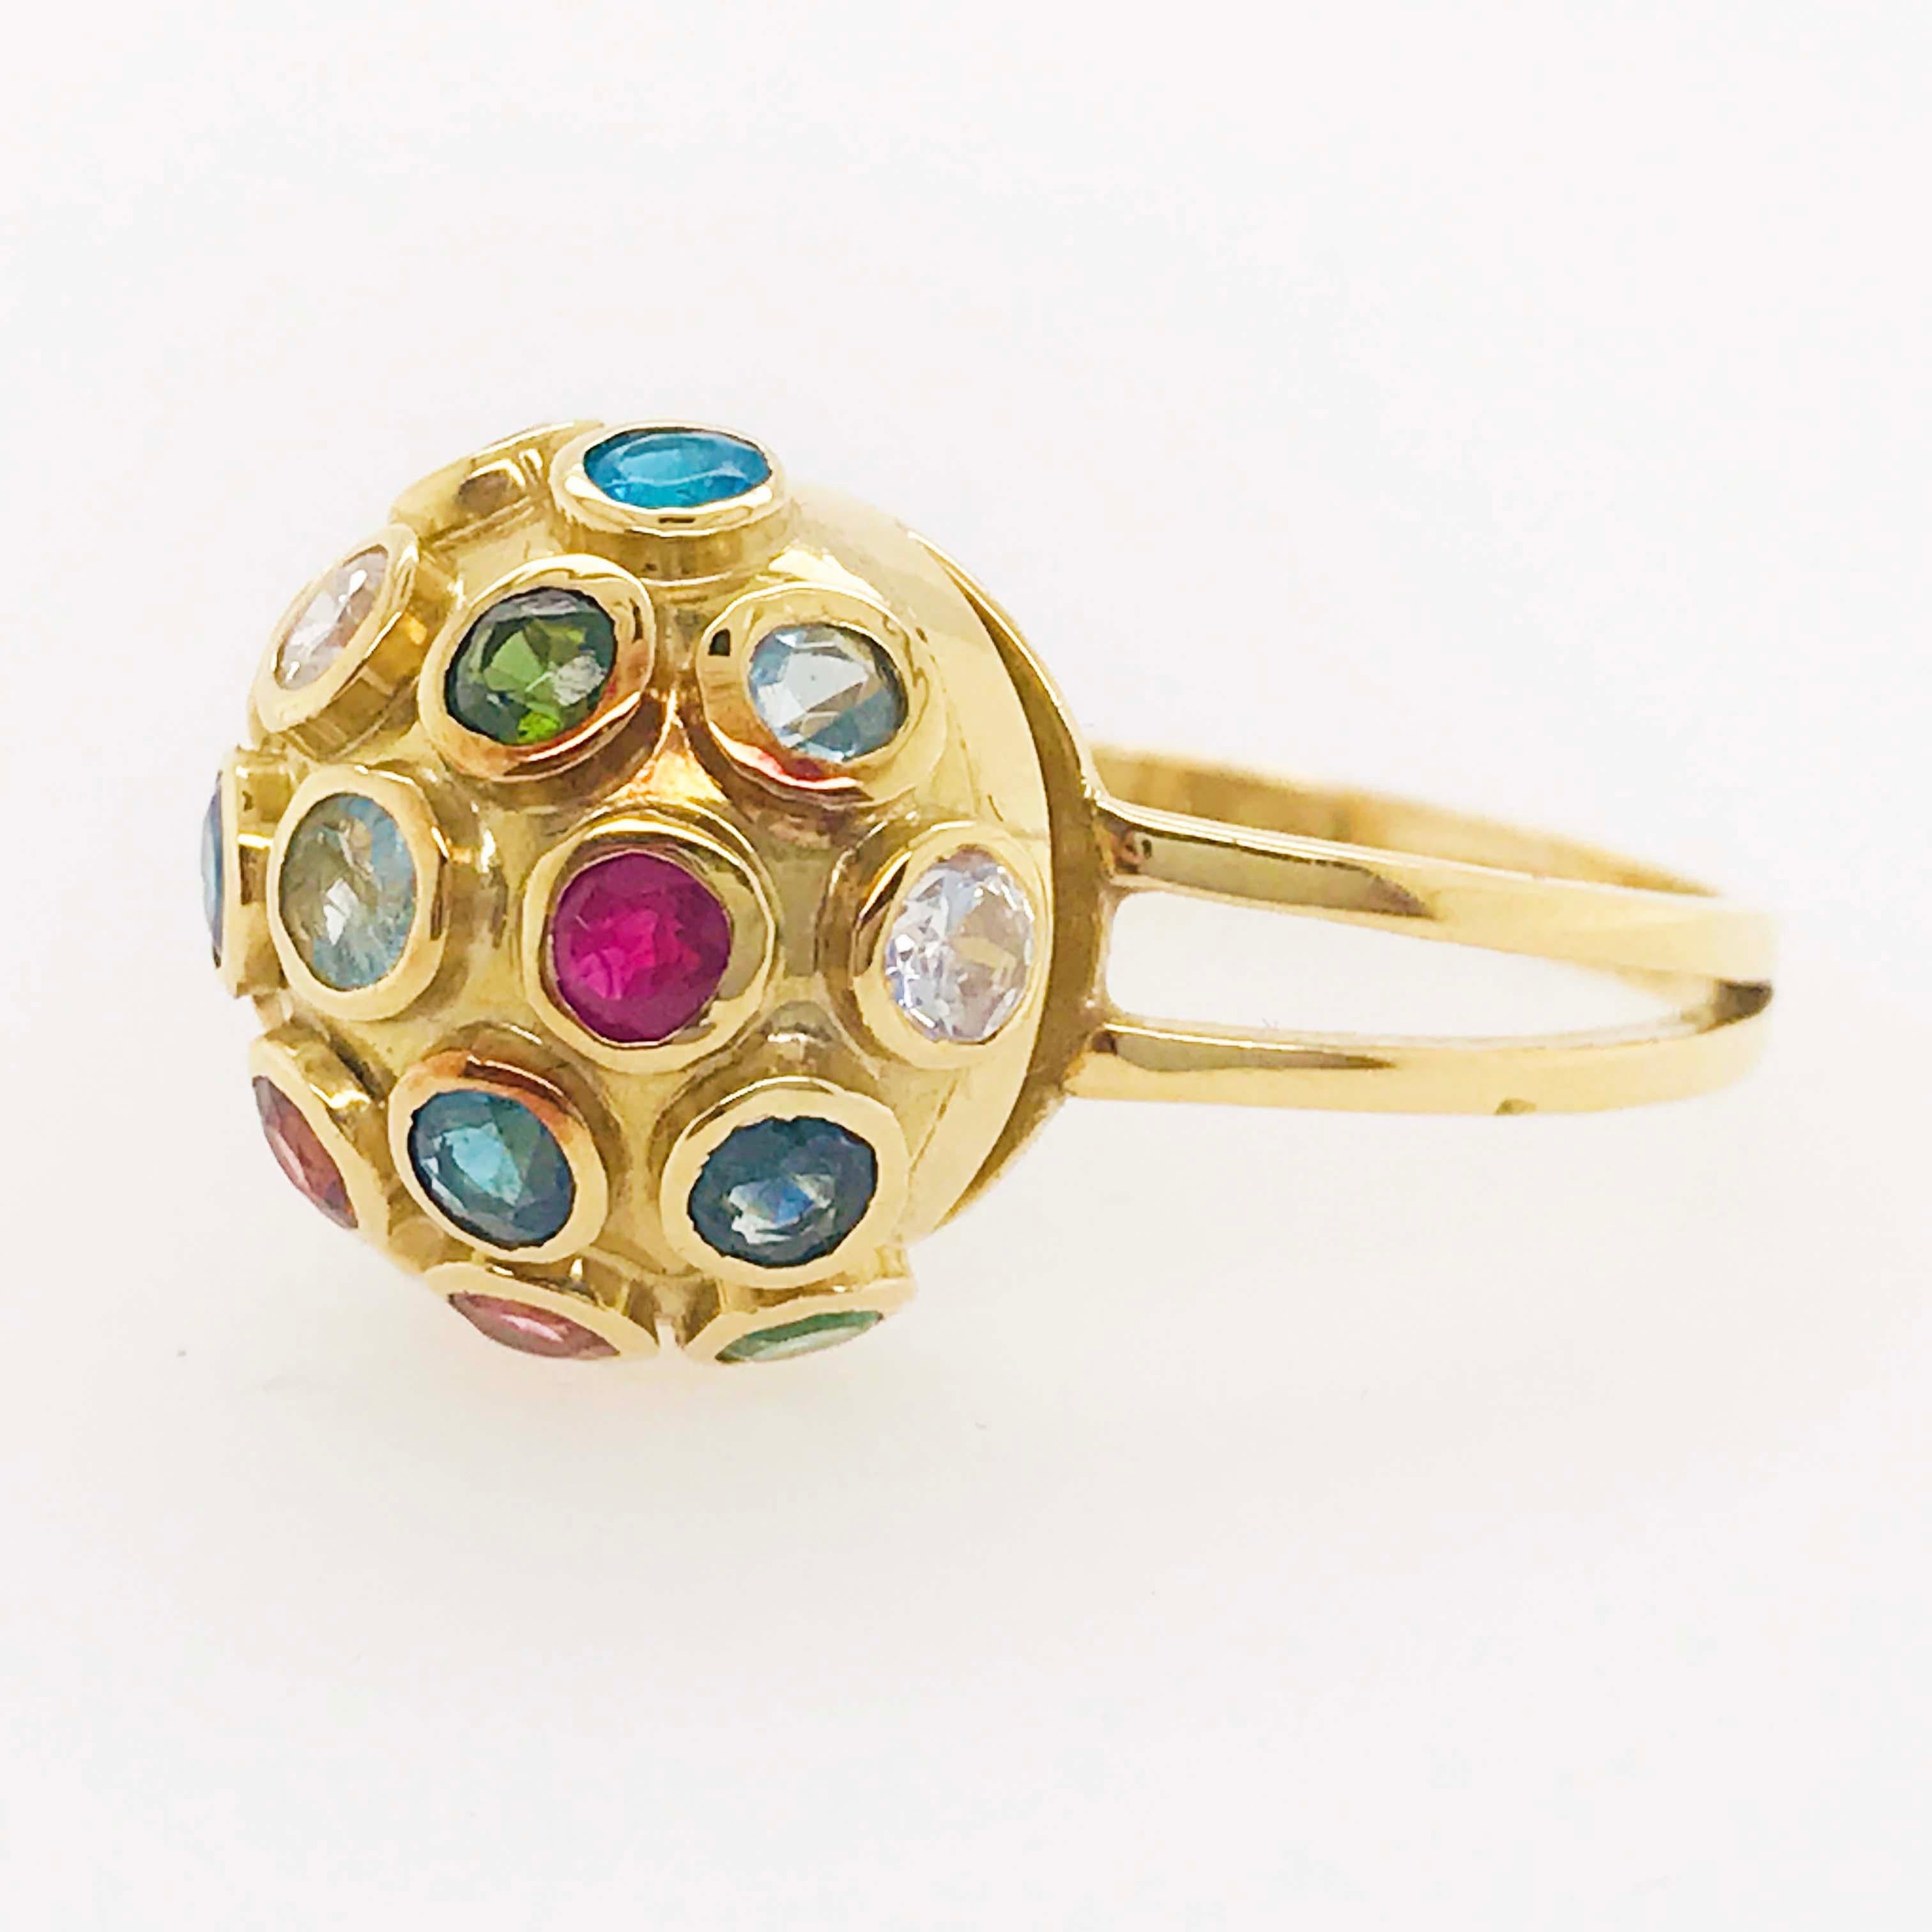 Gemstone Retro Disco Ball Dome Ring in 18 Karat Yellow Gold, Estate Ring In Excellent Condition For Sale In Austin, TX